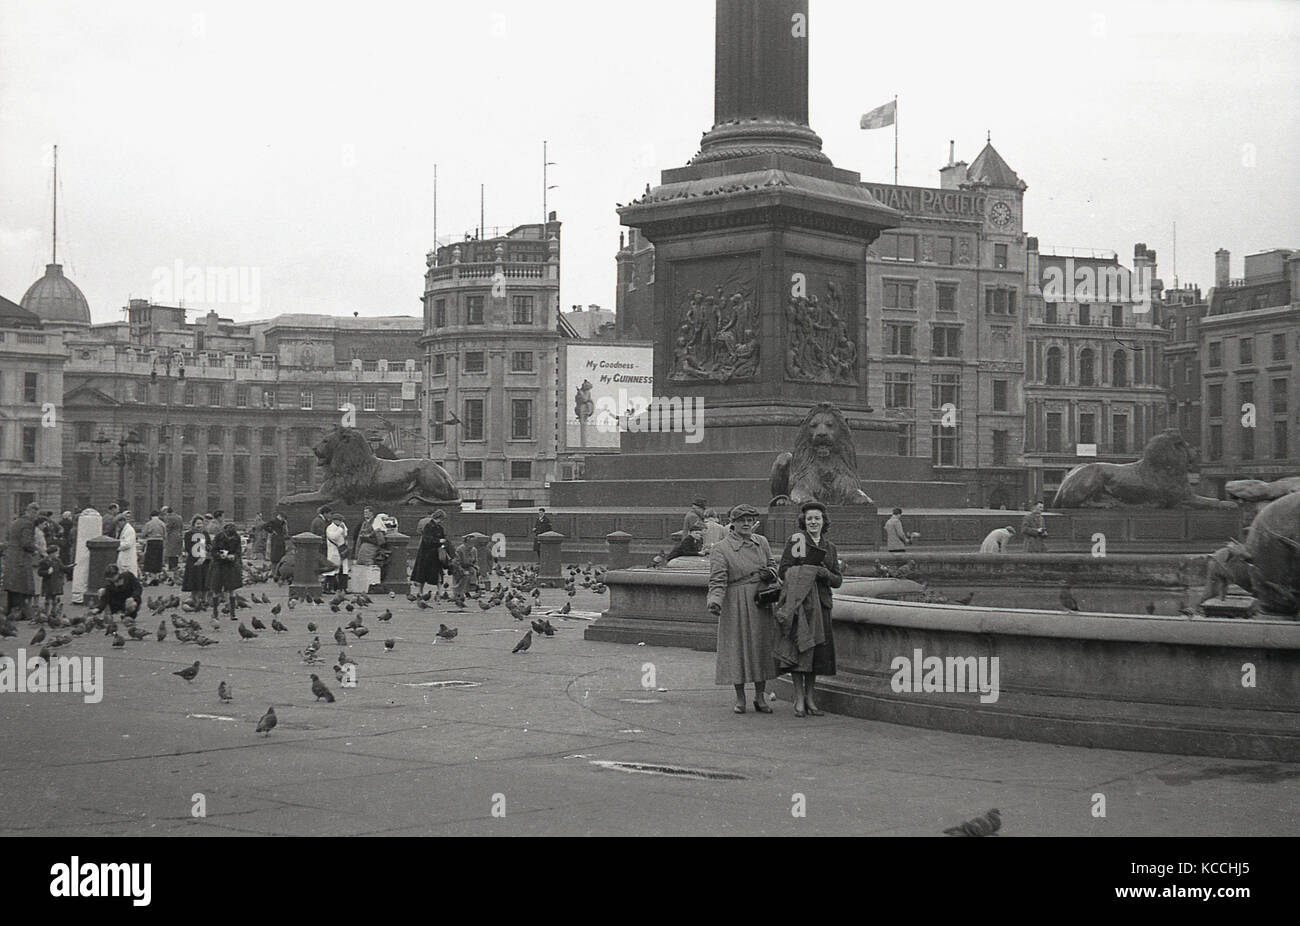 1944, historical picture of some visitors to the famous Trafalgar Square in Central London, England, UK. People feeding the pigeons by the base of Nelson's Column. Stock Photo